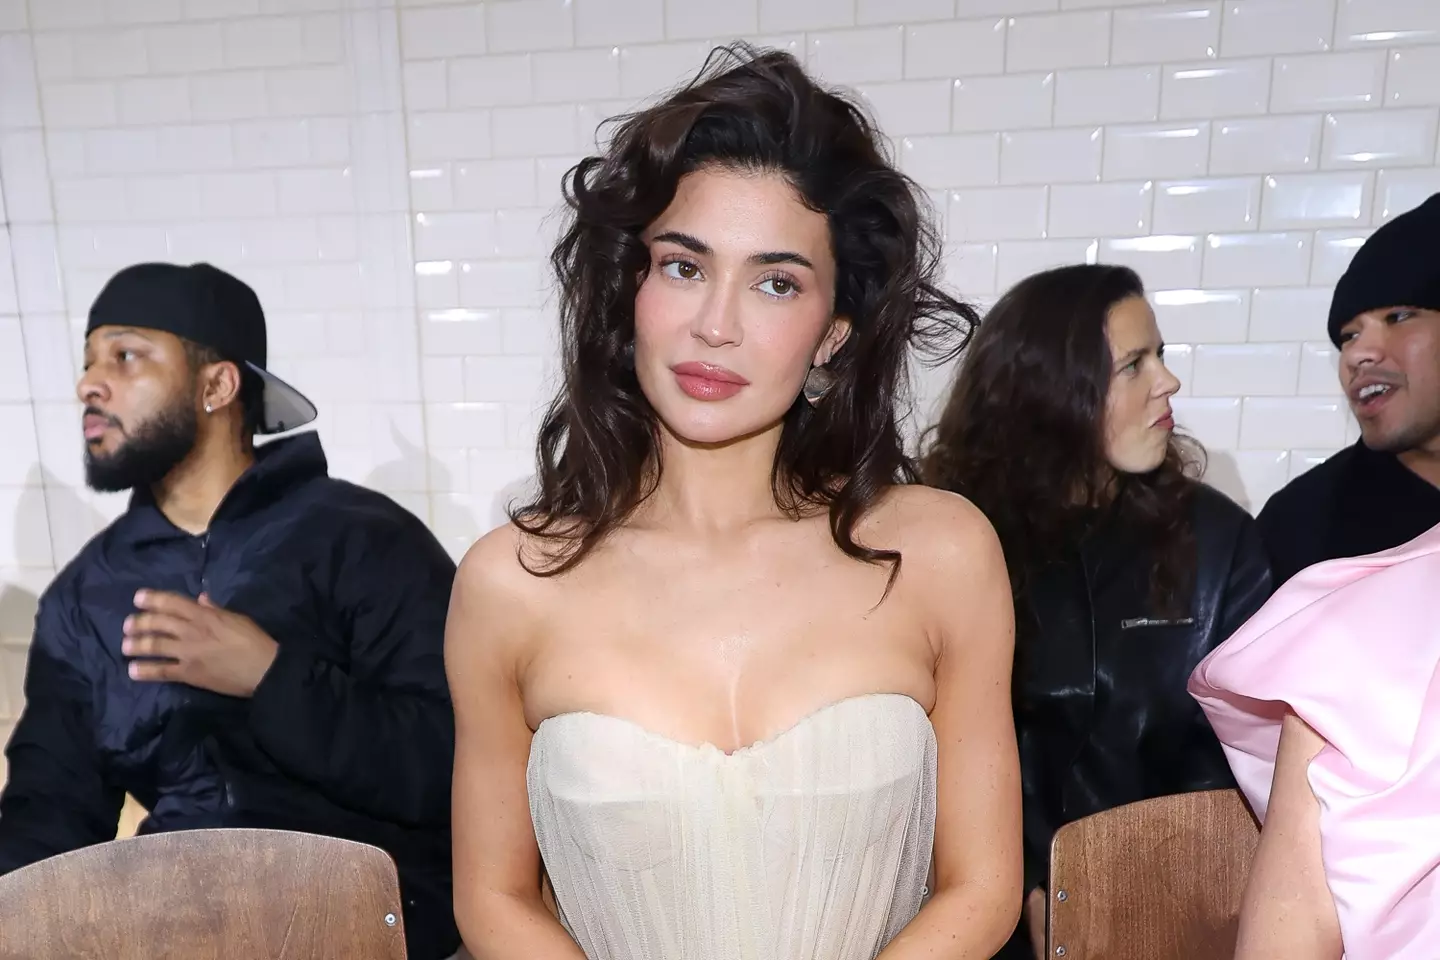 Trolls went for Kylie Jenner after she appeared at Paris Fashion Week.